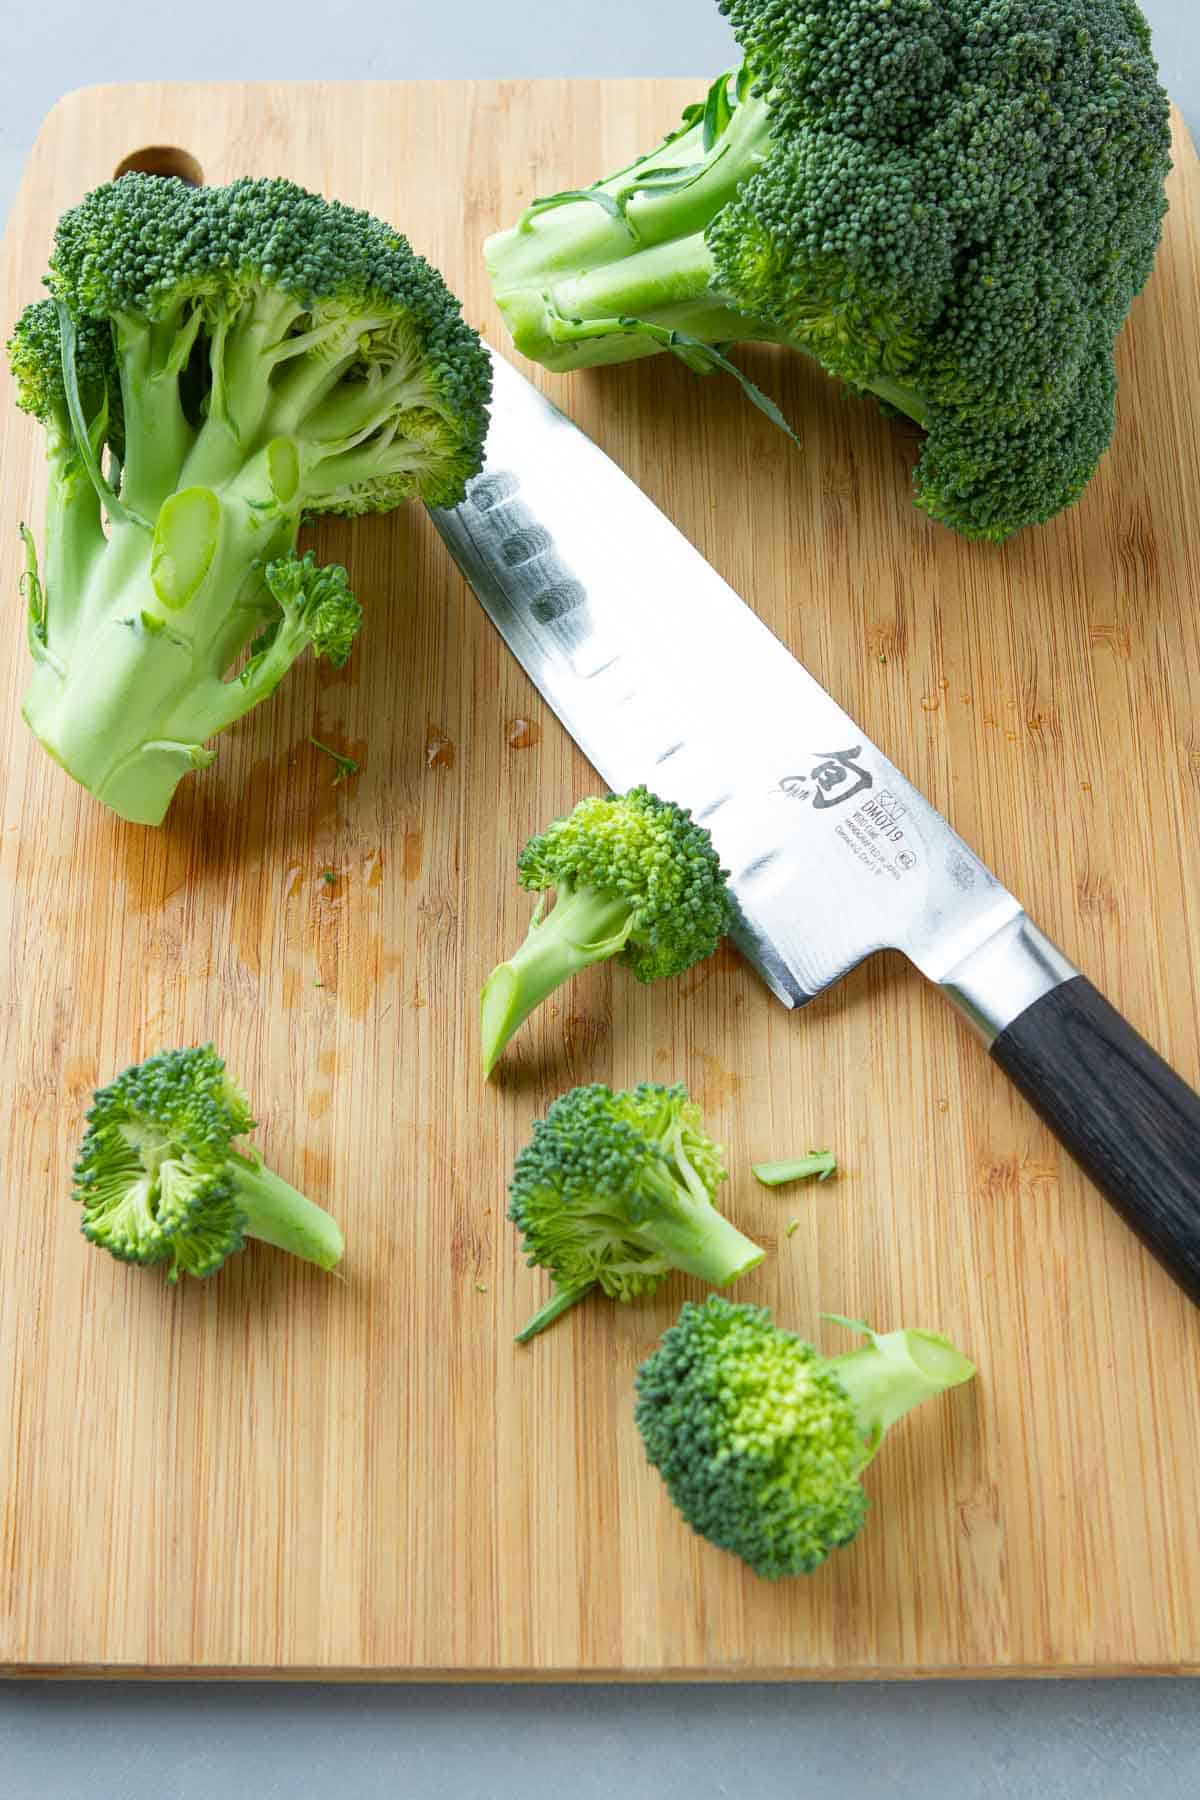 Broccoli crown, florets and a knife on a cutting board.